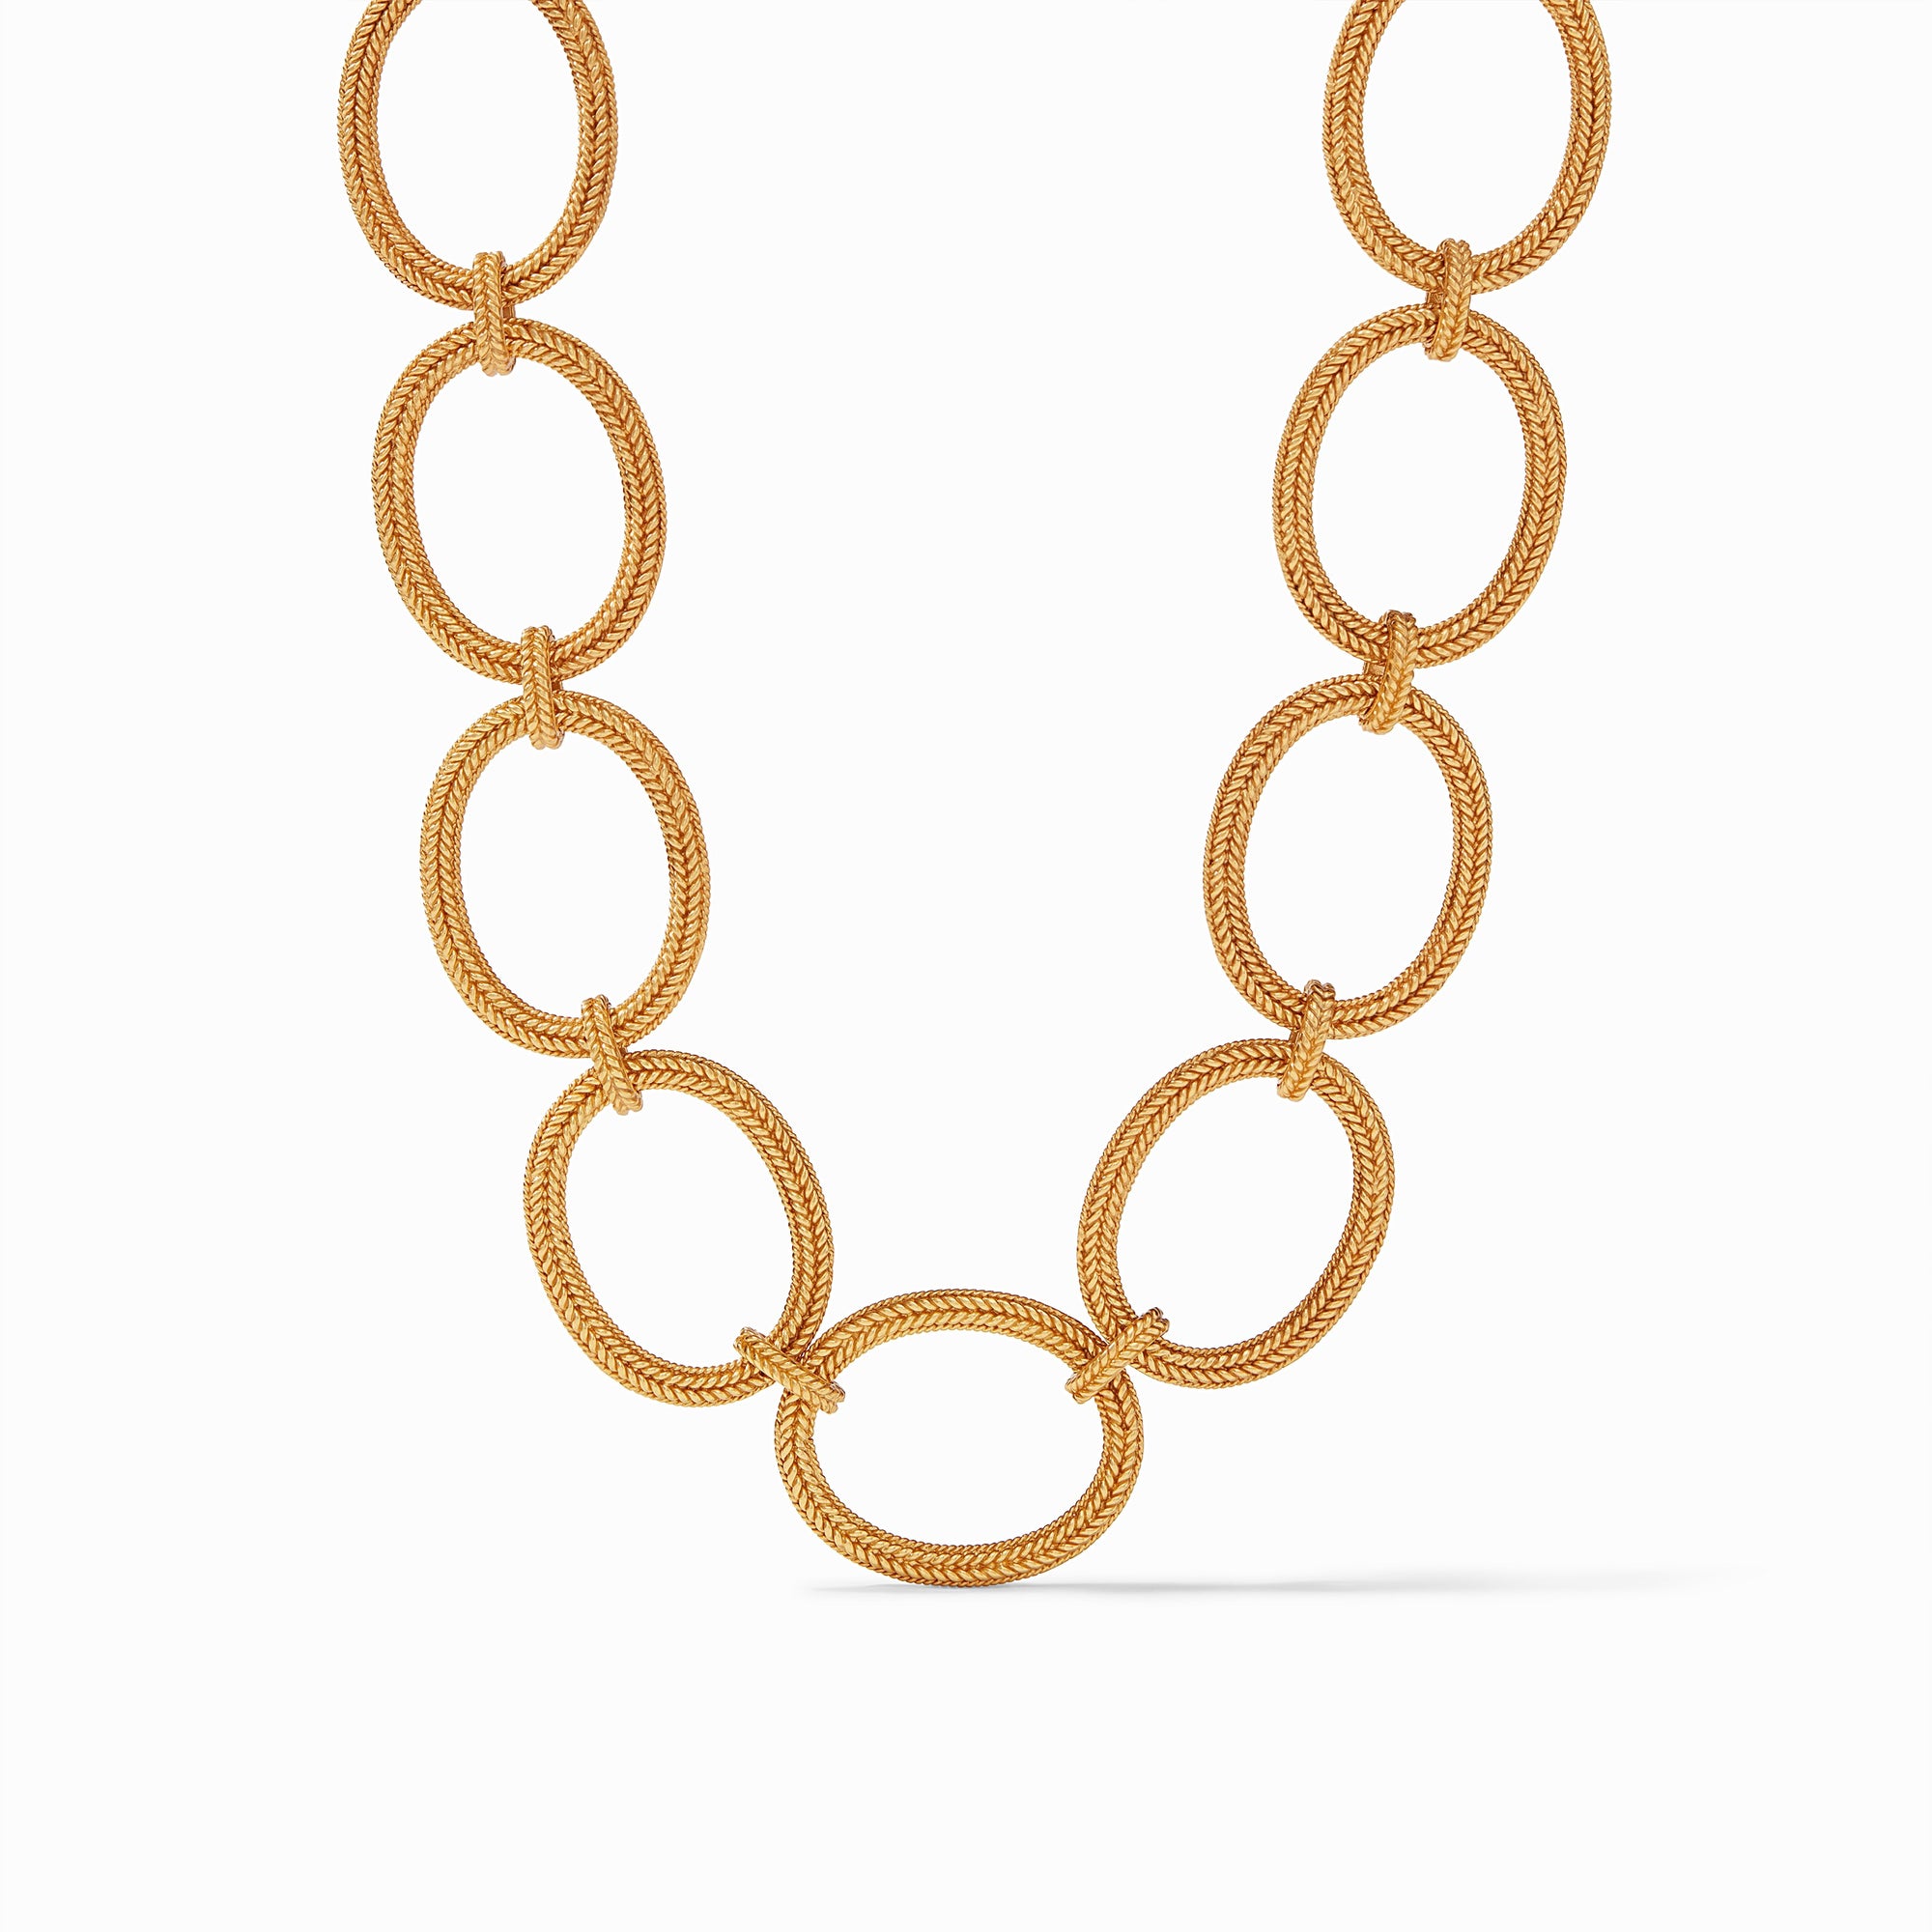 carousel, Windsor Gold Chevron Oval Link Necklace